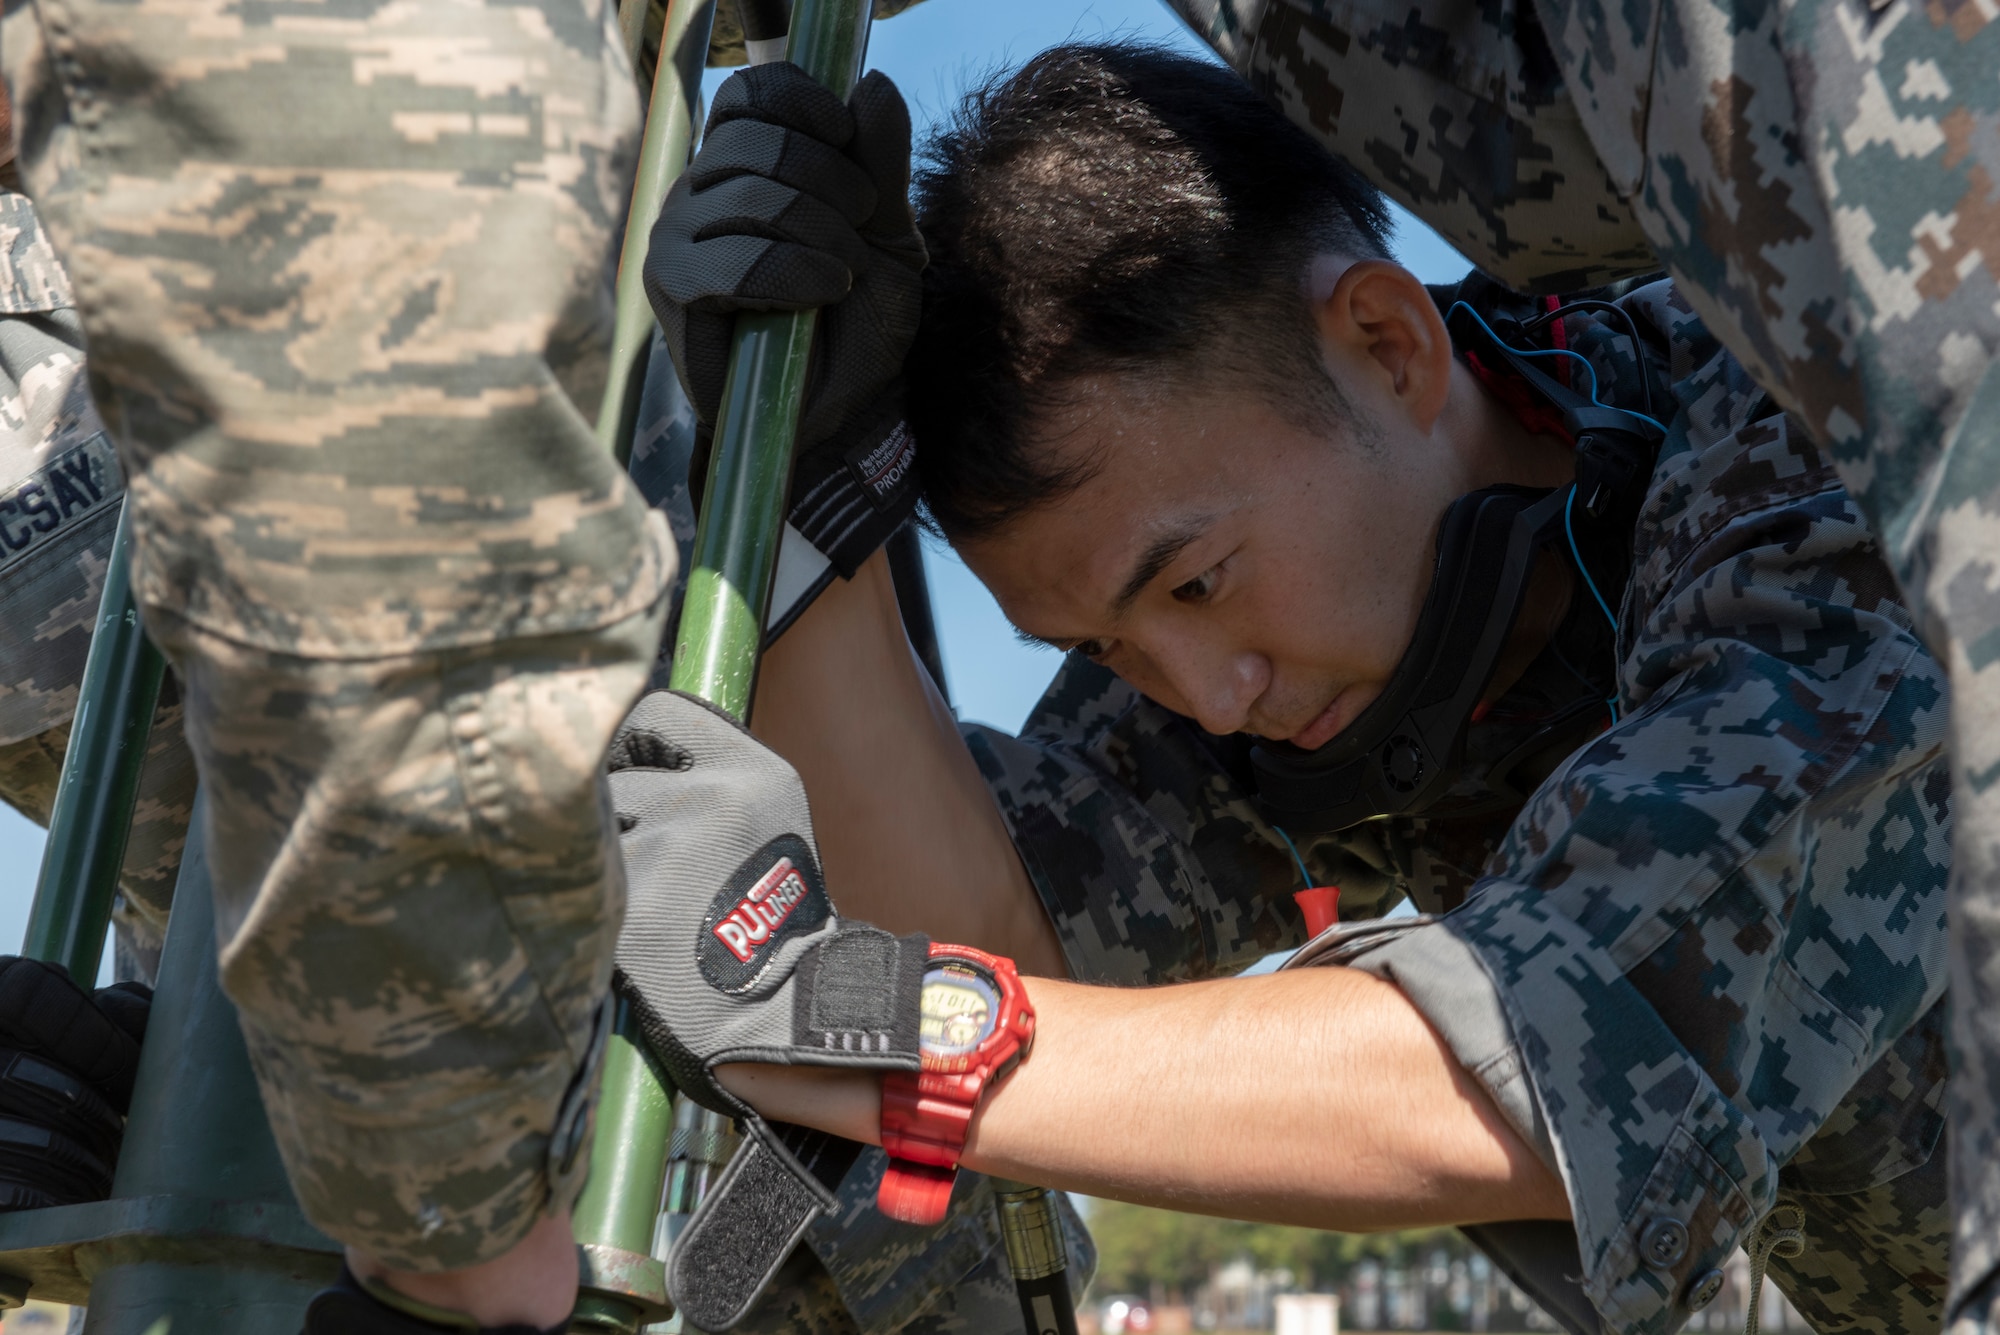 A member of the Koku Jietai (Japan Air Self-Defense Force) works with the Airmen from the 374th Civil Engineer Squadron to secure the Mobile Aircraft Arresting System (MAAS) in place at a bilateral training event at Yokota Air Base, Japan, Oct. 25, 2018.